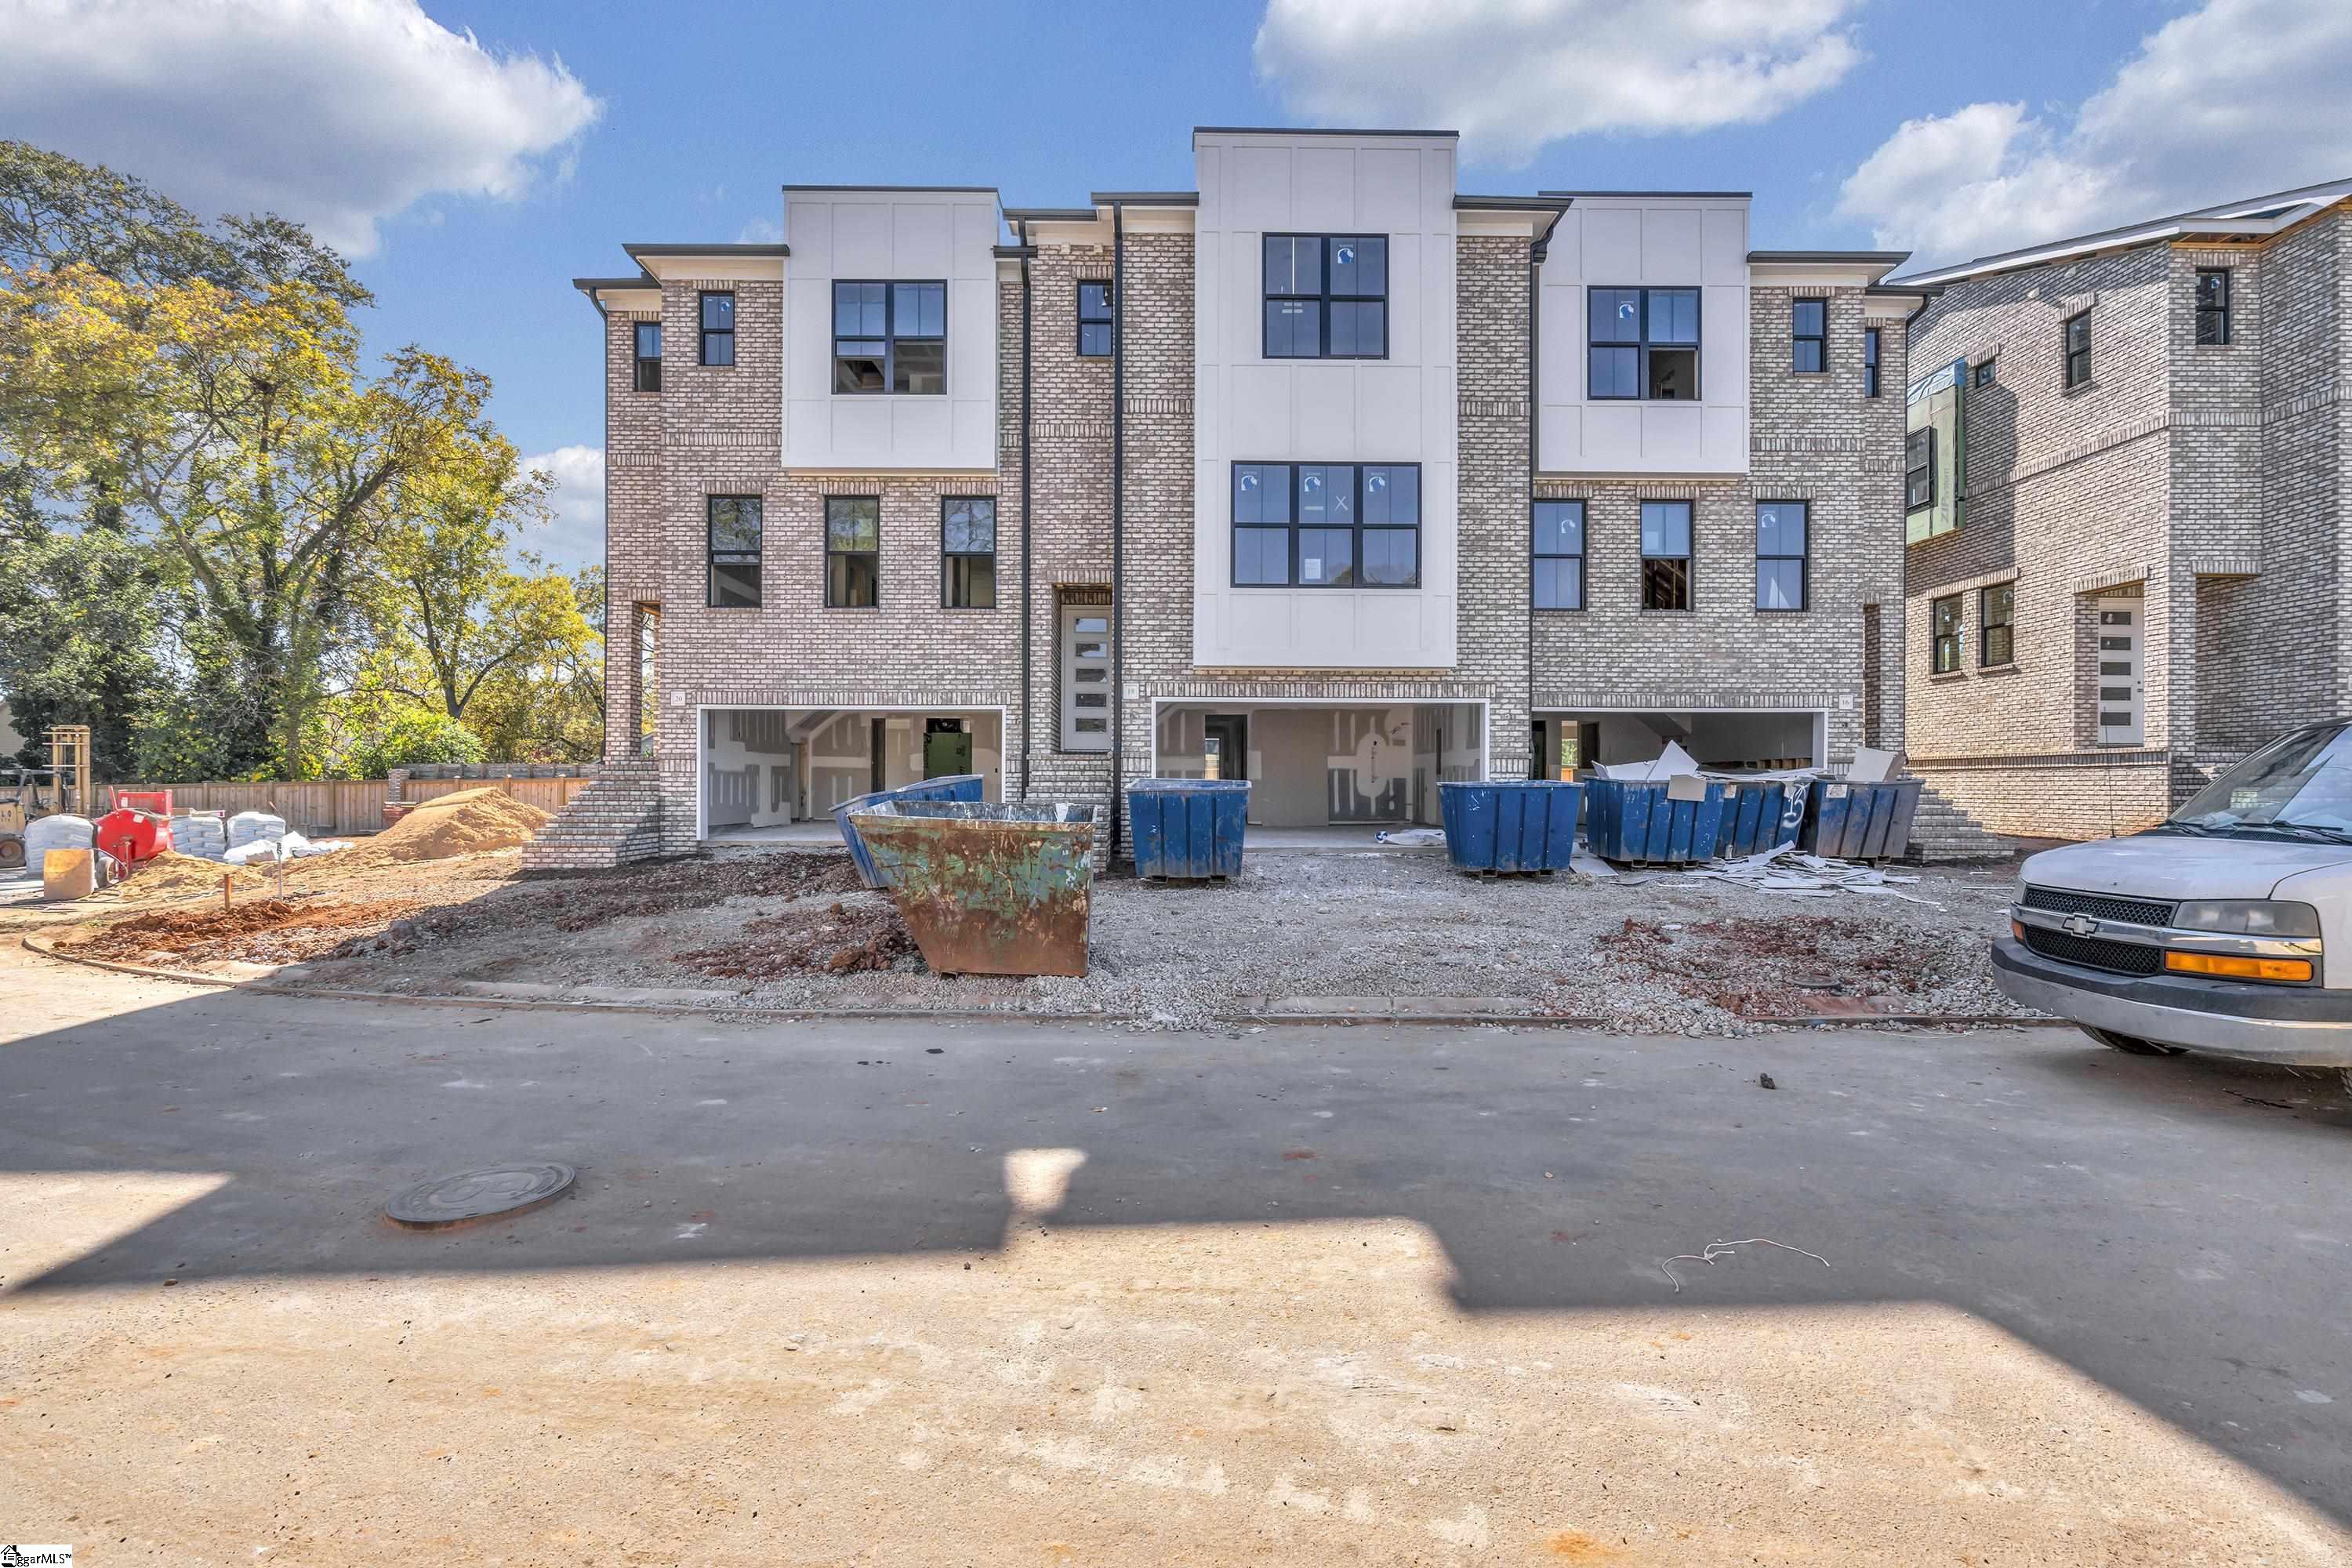 View Greenville, SC 29601 townhome